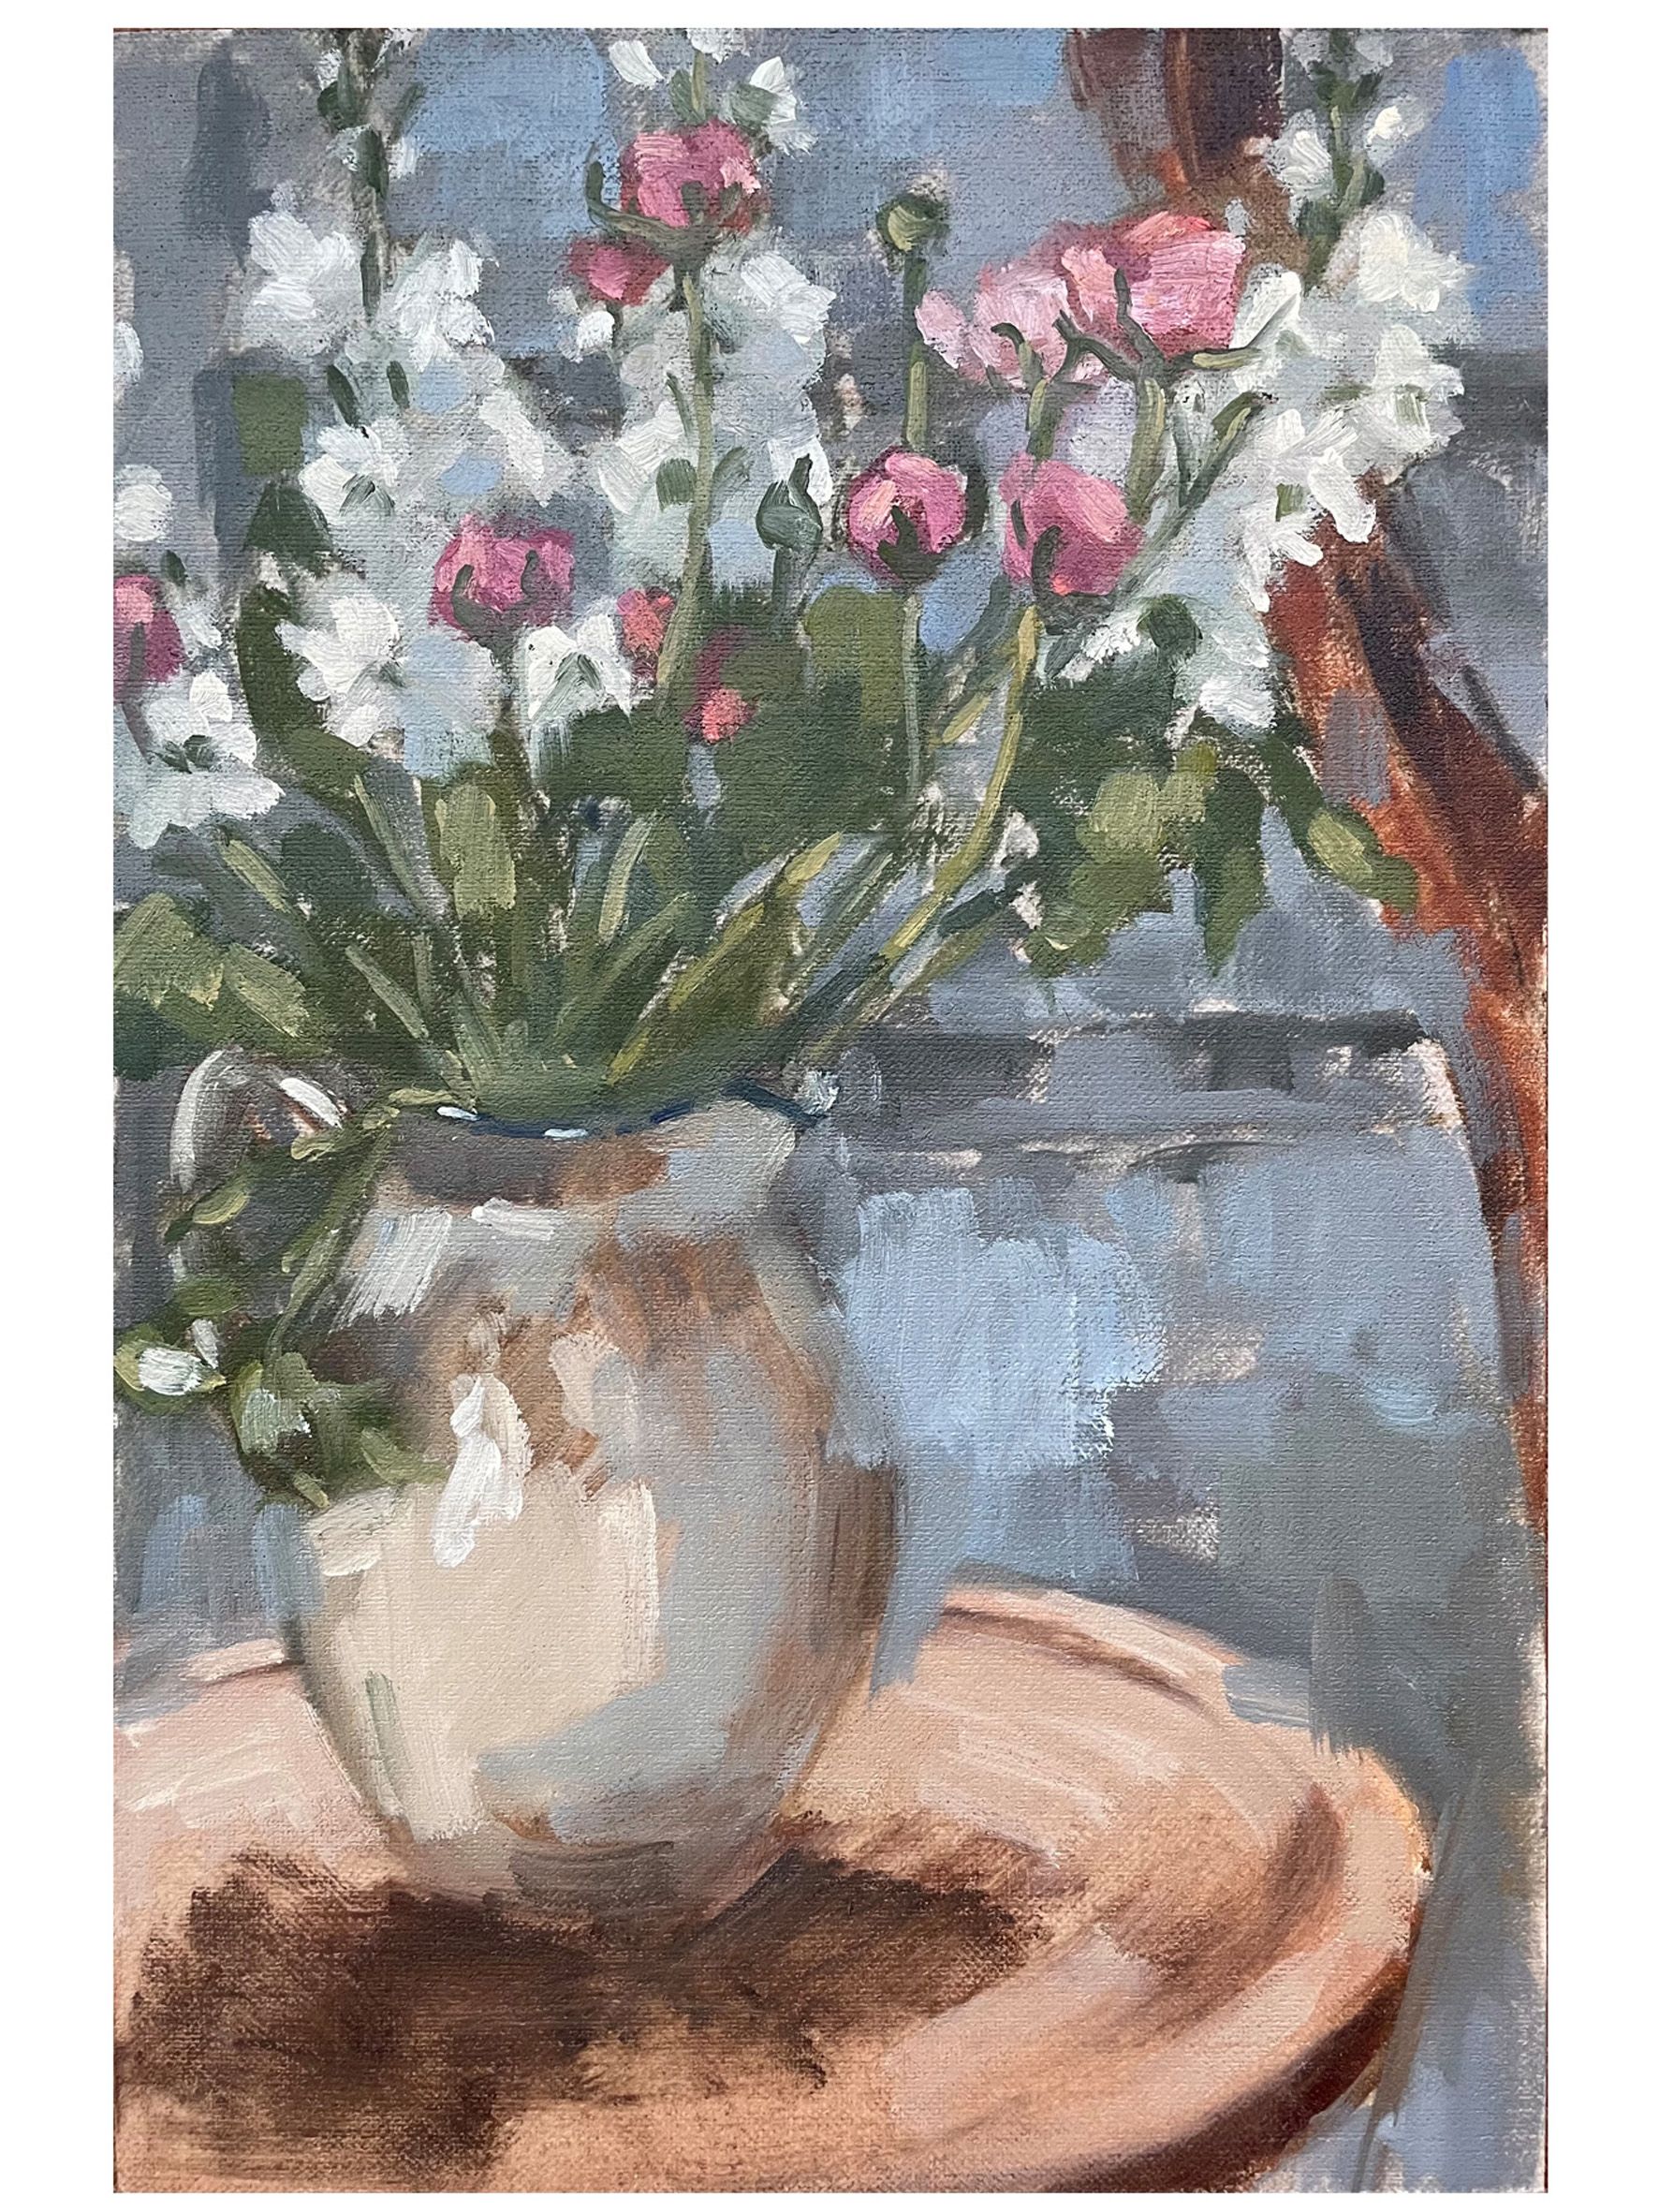 Jug of Flowers by Fiona Carver